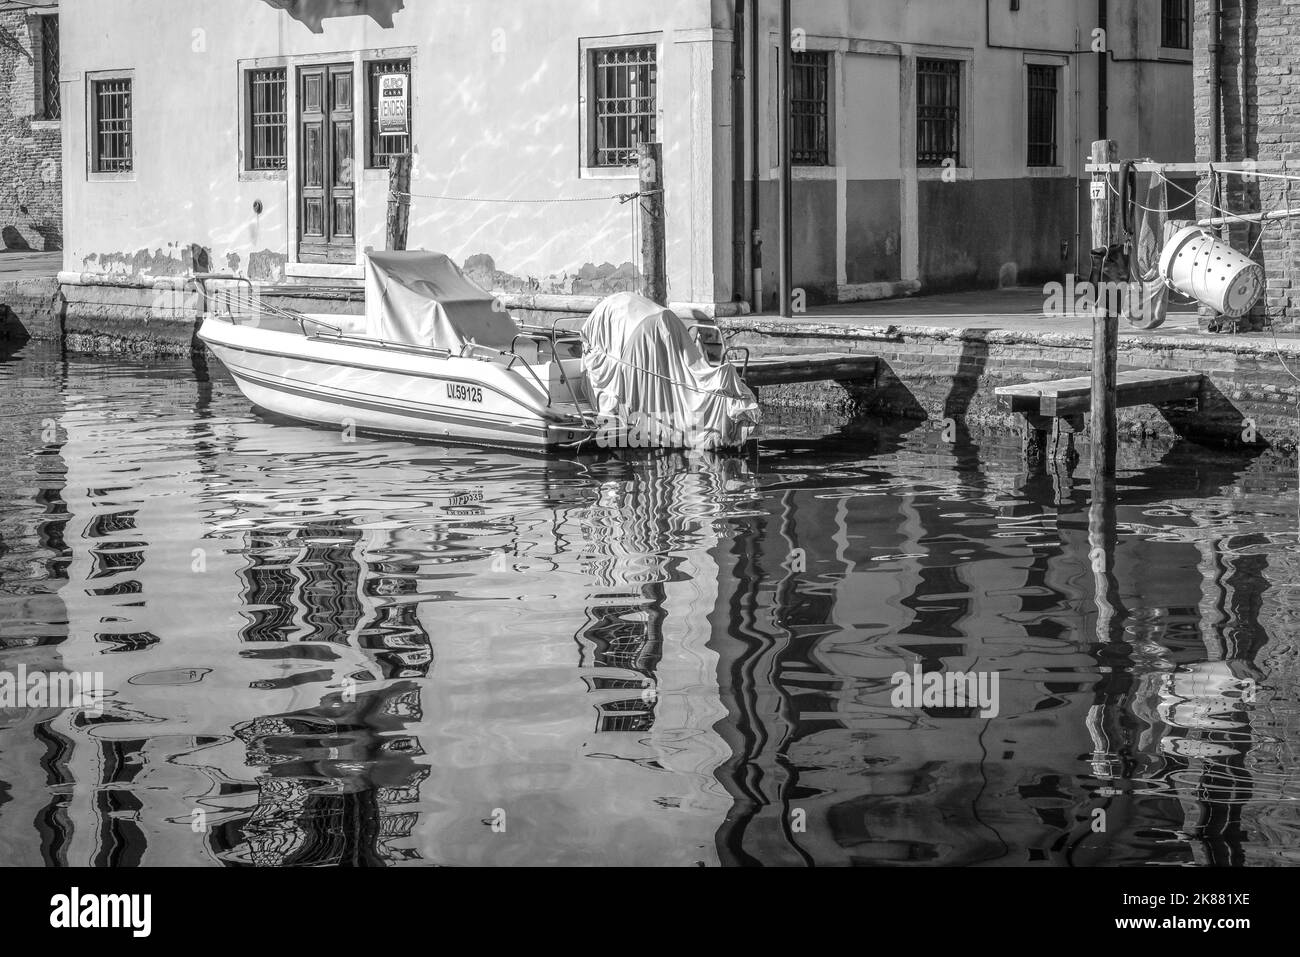 motorboat moored along the canal in Chioggia city, Venetian lagoon, Venice province, Veneto district, northern Italy- Europe - black and white image Stock Photo